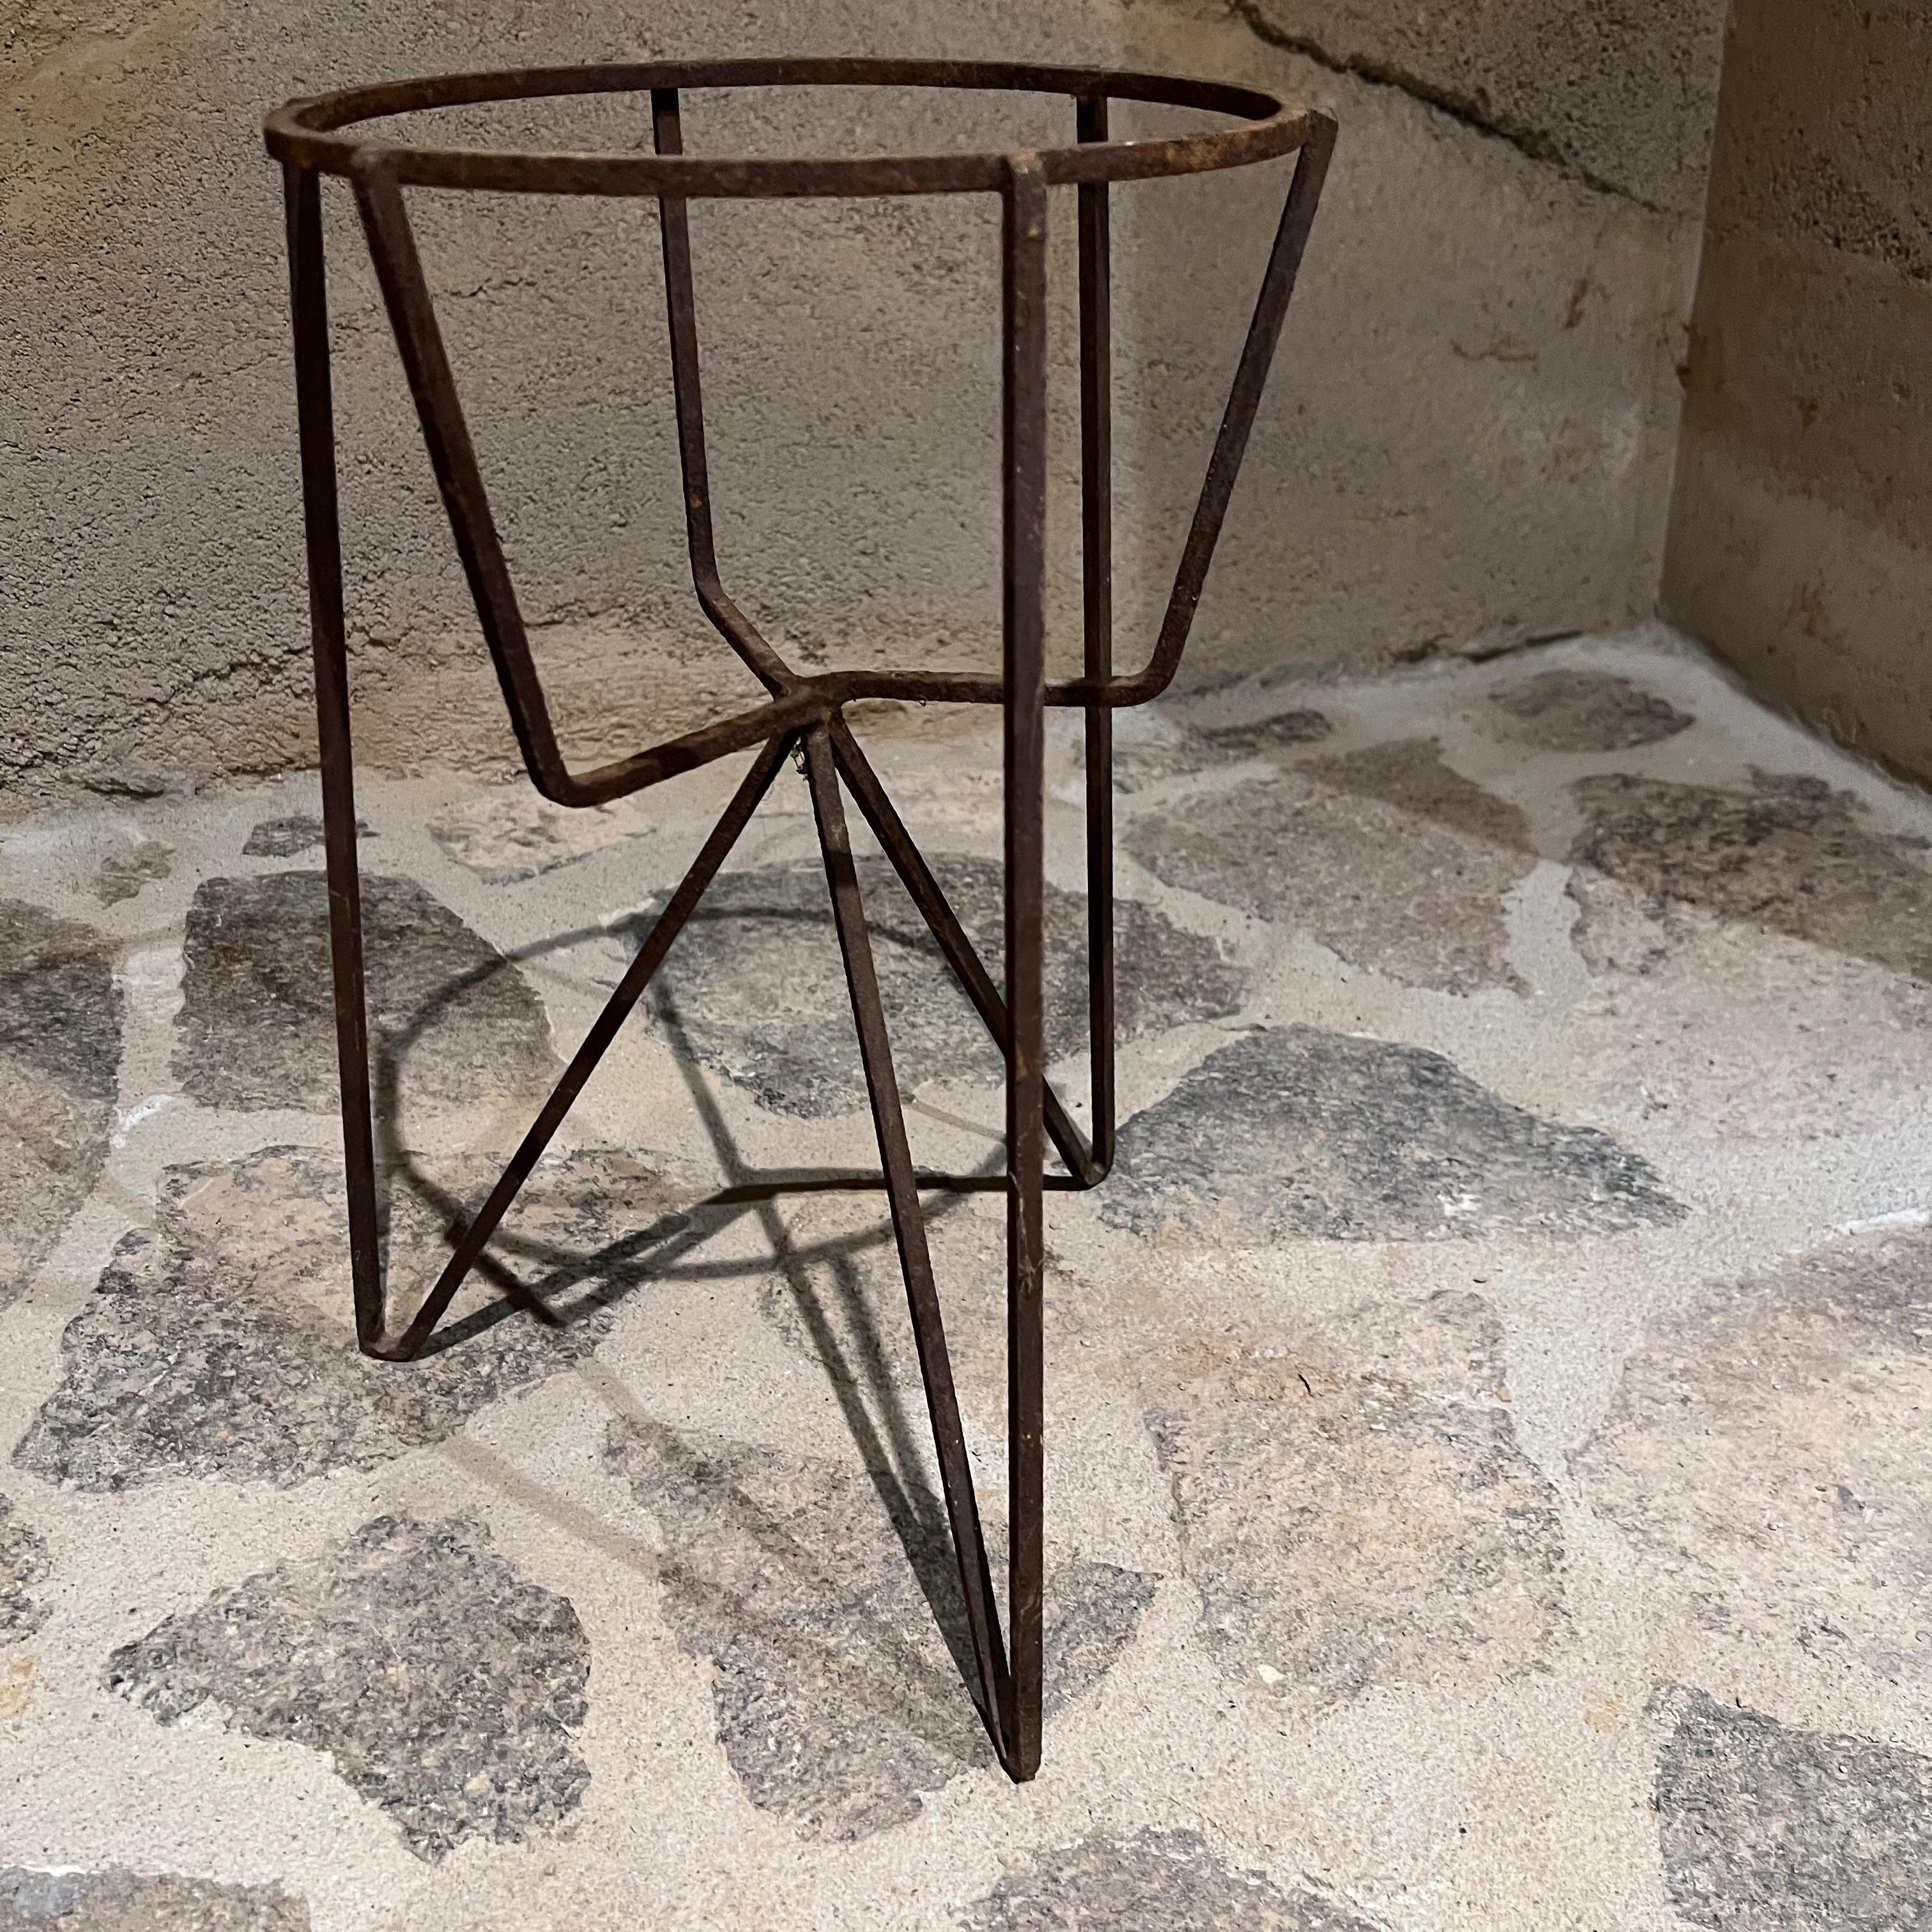 1950s plant stand